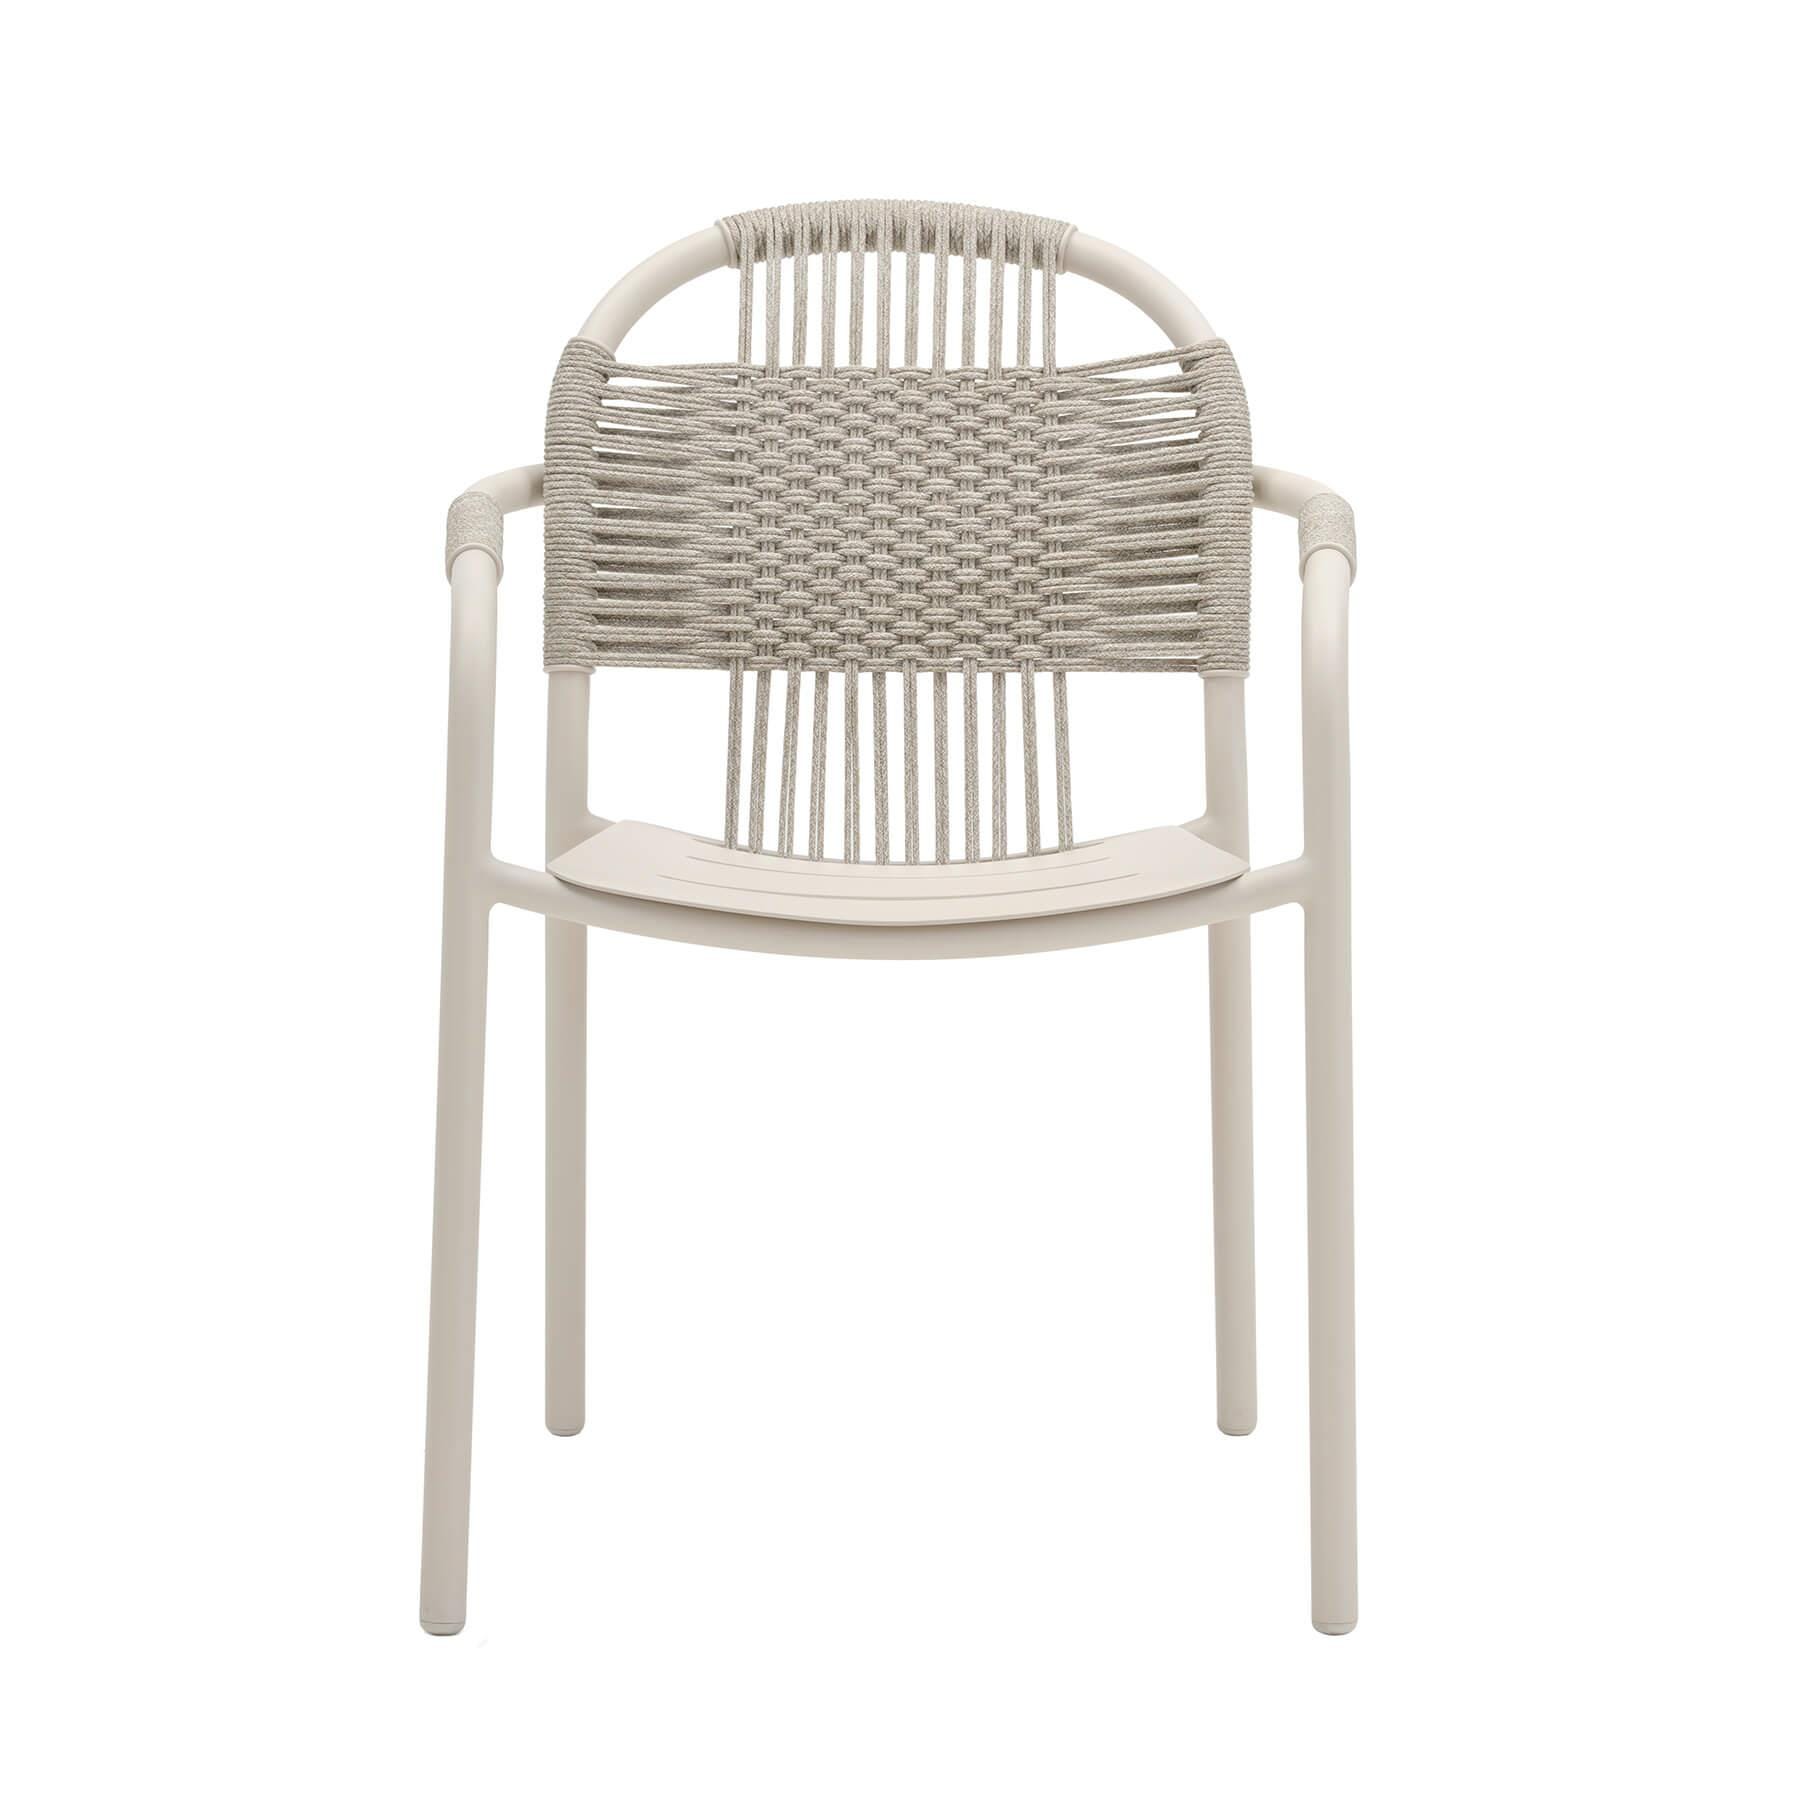 Vincent Sheppard Cleo Garden Dining Armchair Dune White Designer Furniture From Holloways Of Ludlow